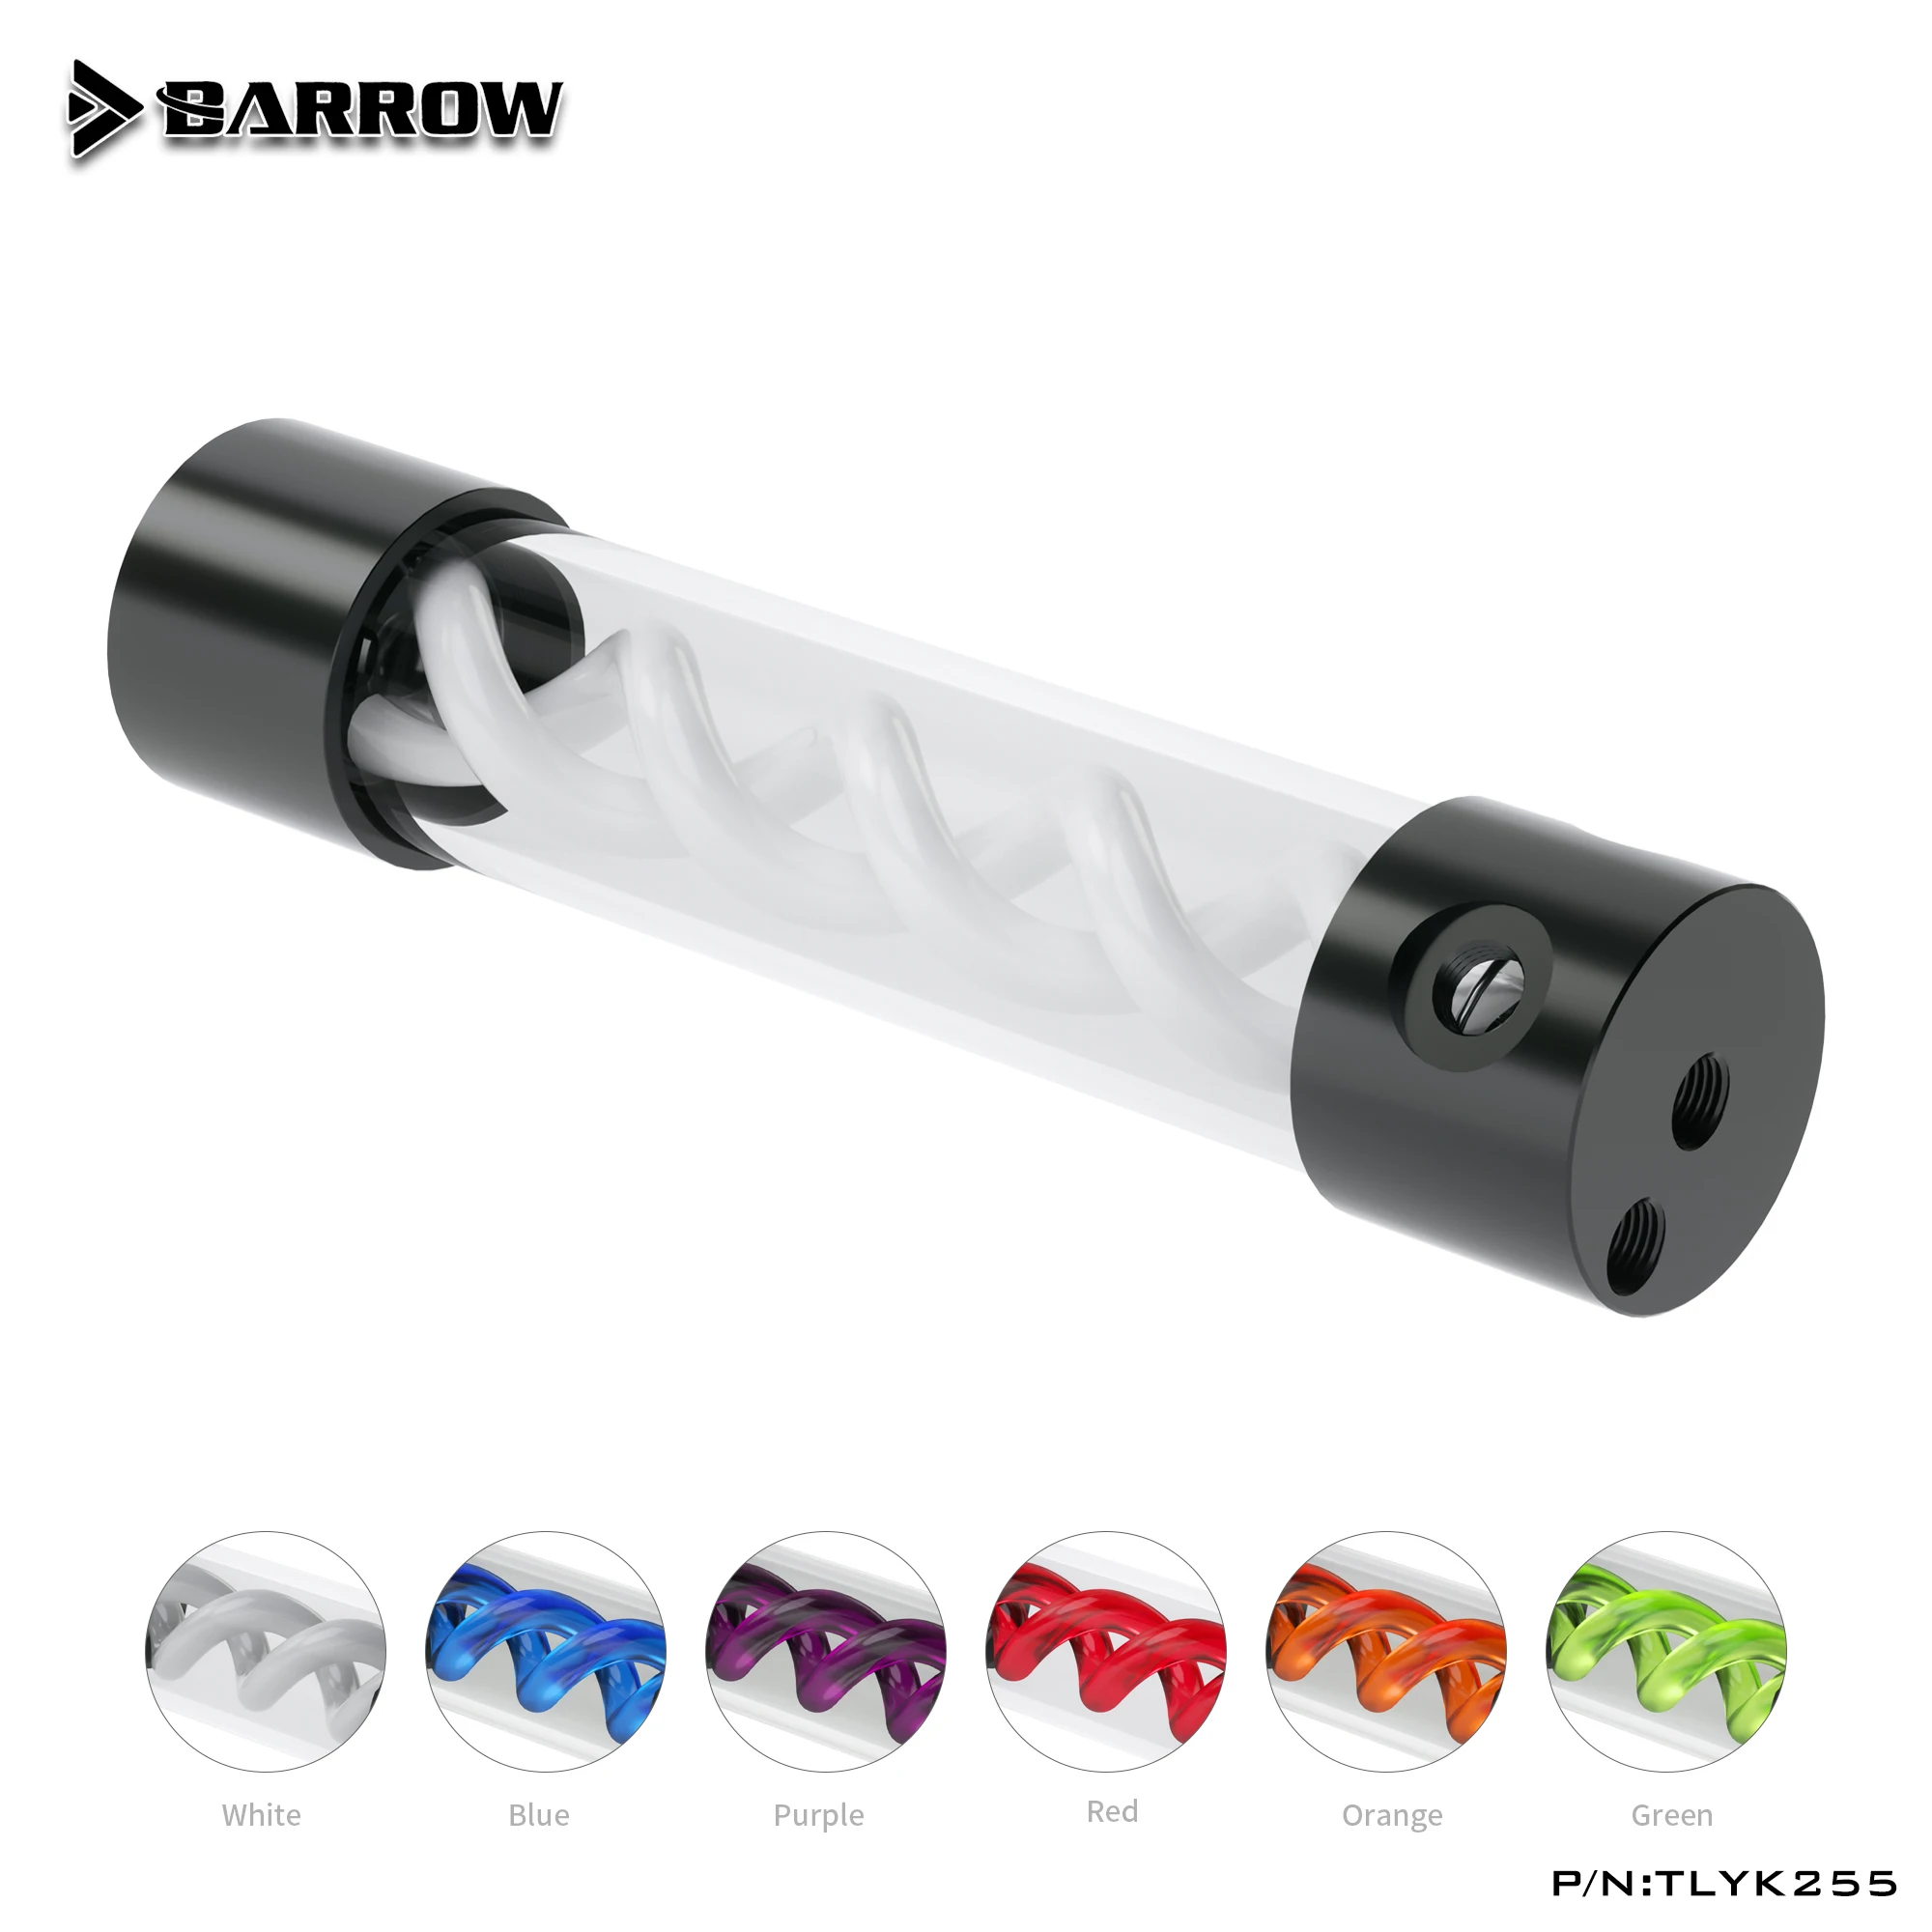 

Barrow TLYK-255 Multi-colored Virus-T Cylinder Reservoir , Water Cooling Tank, Come With UV/White Lighting